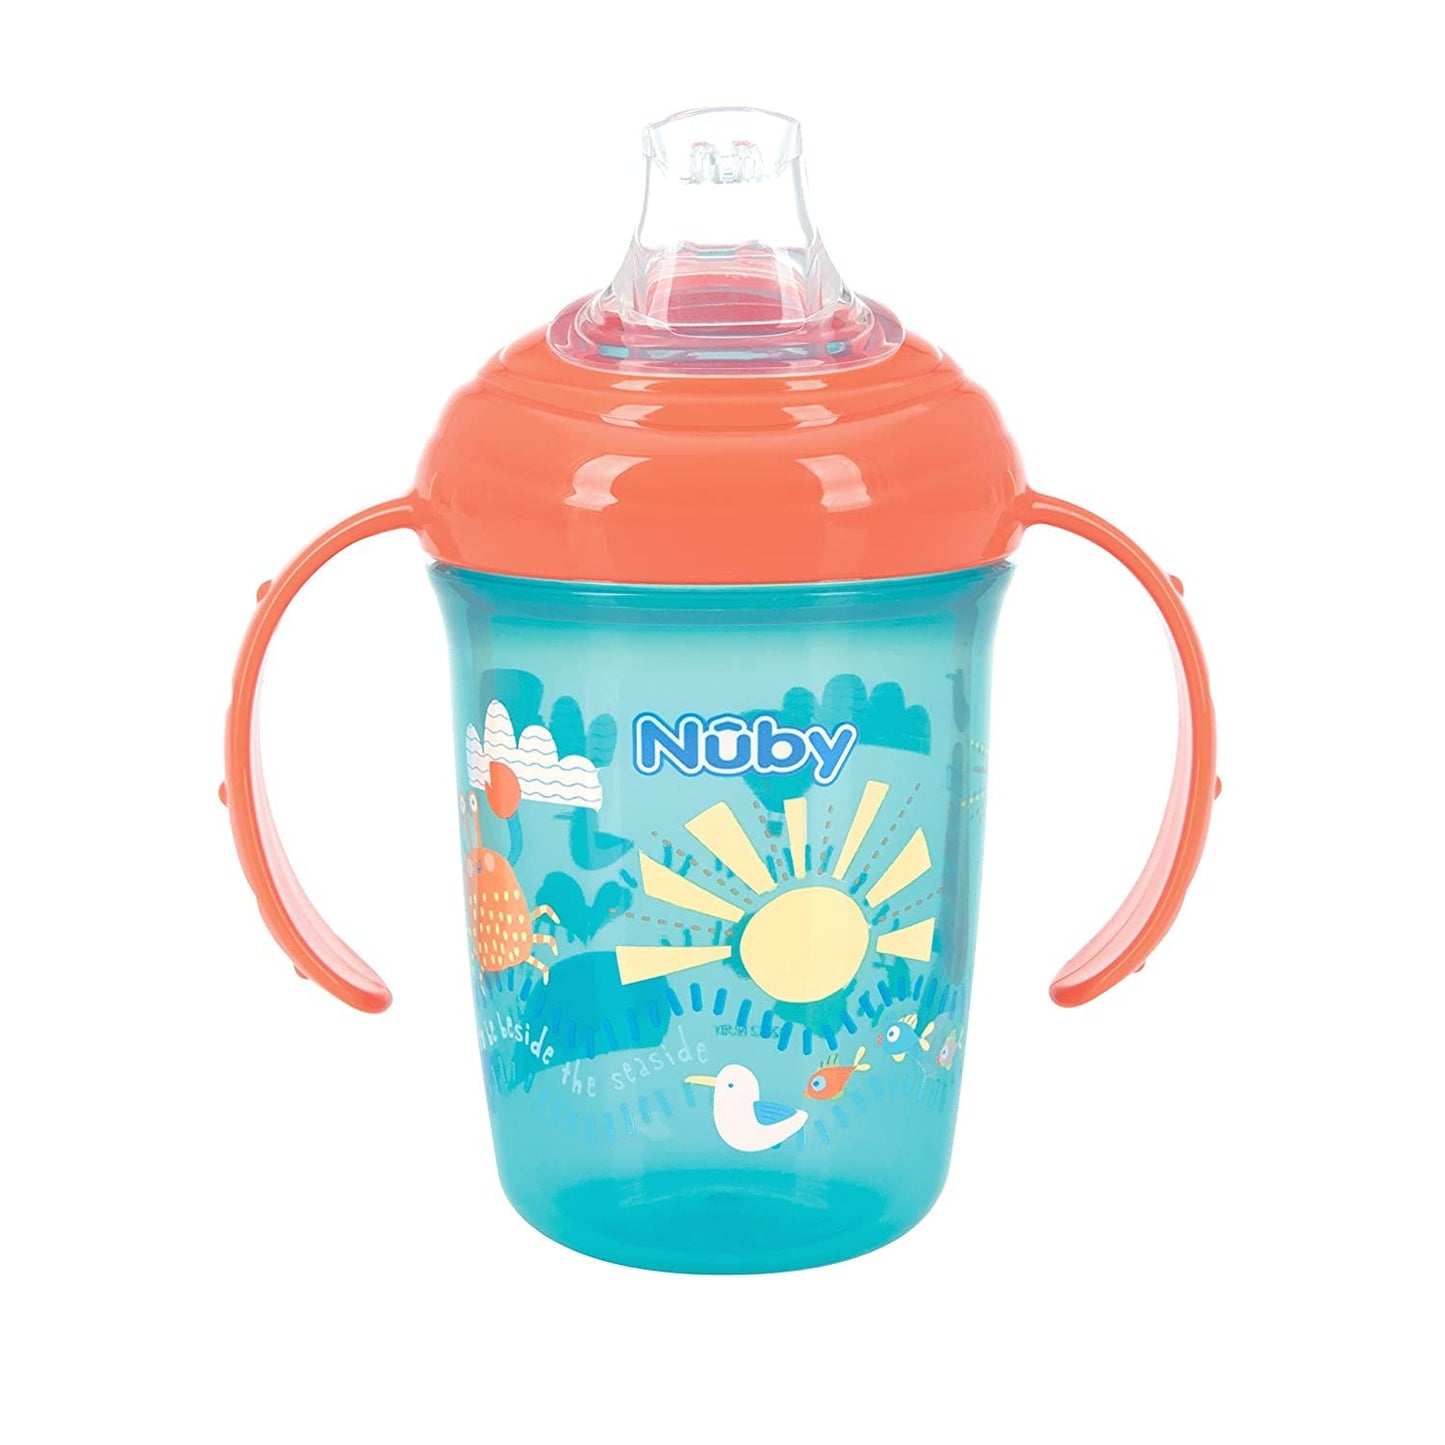 Nuby 2-Handle No-Spill Printed Trainer Cup with Soft Spout and Hygienic Cover - 8oz/ 240 ml, 4+ Months, 1 pk Aqua with Ocean Print